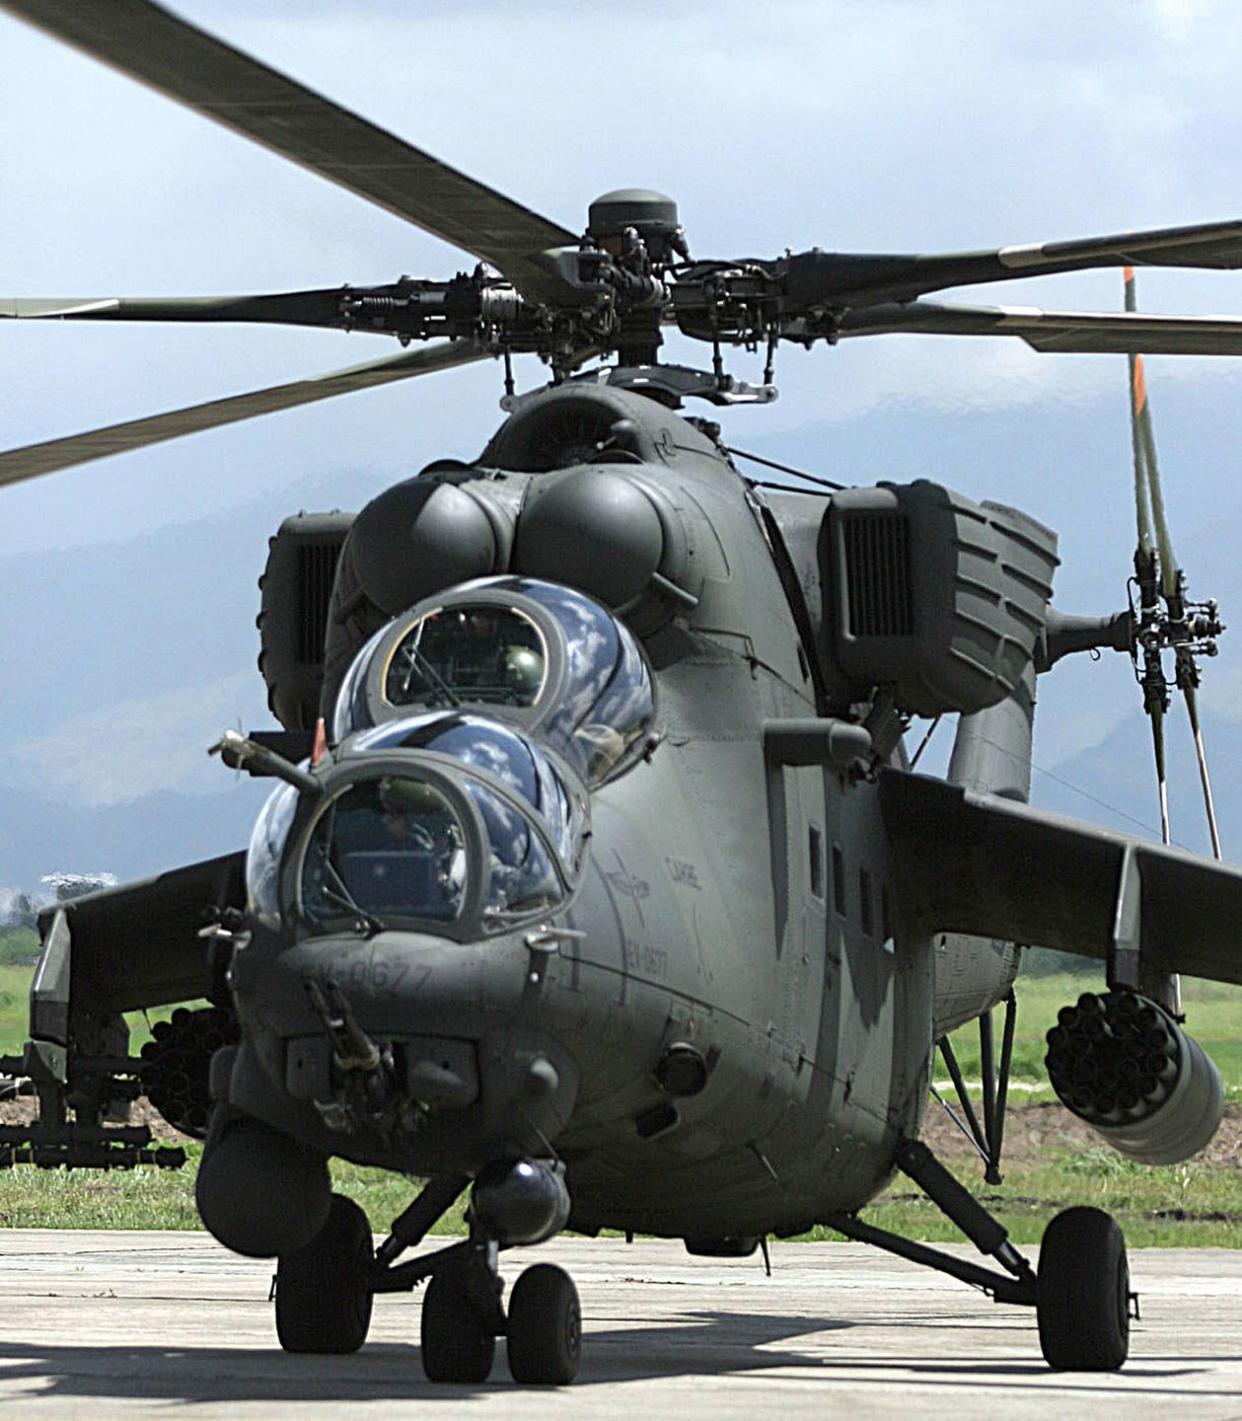 venezuelan mi 35m hind attack helicopter at maracay in 2006